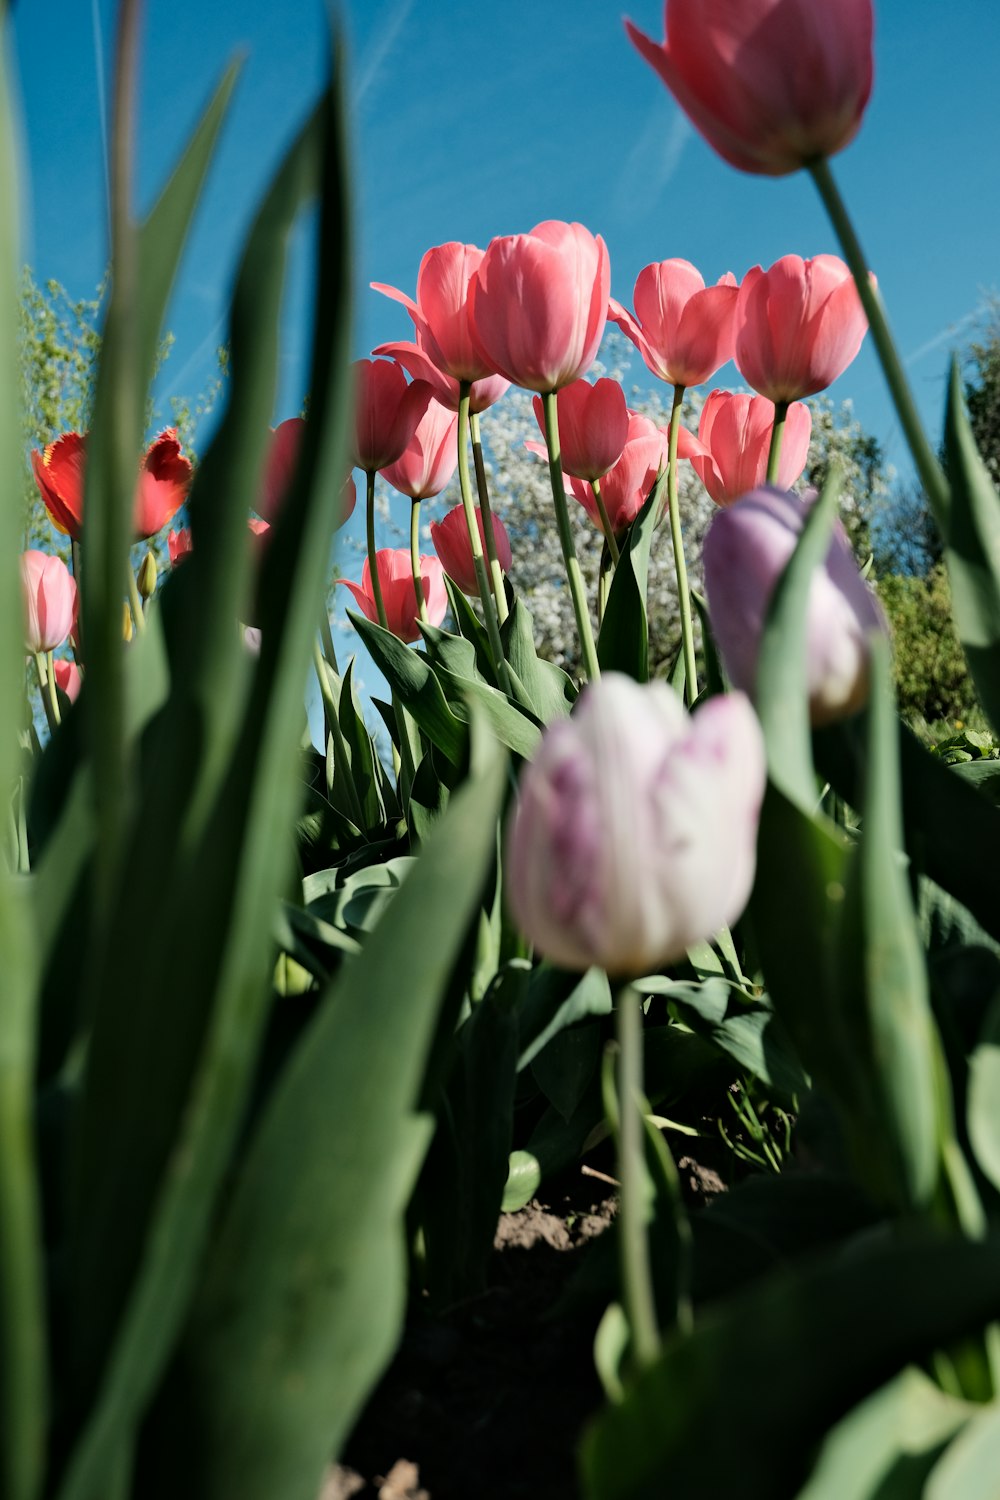 a field of pink tulips with a blue sky in the background